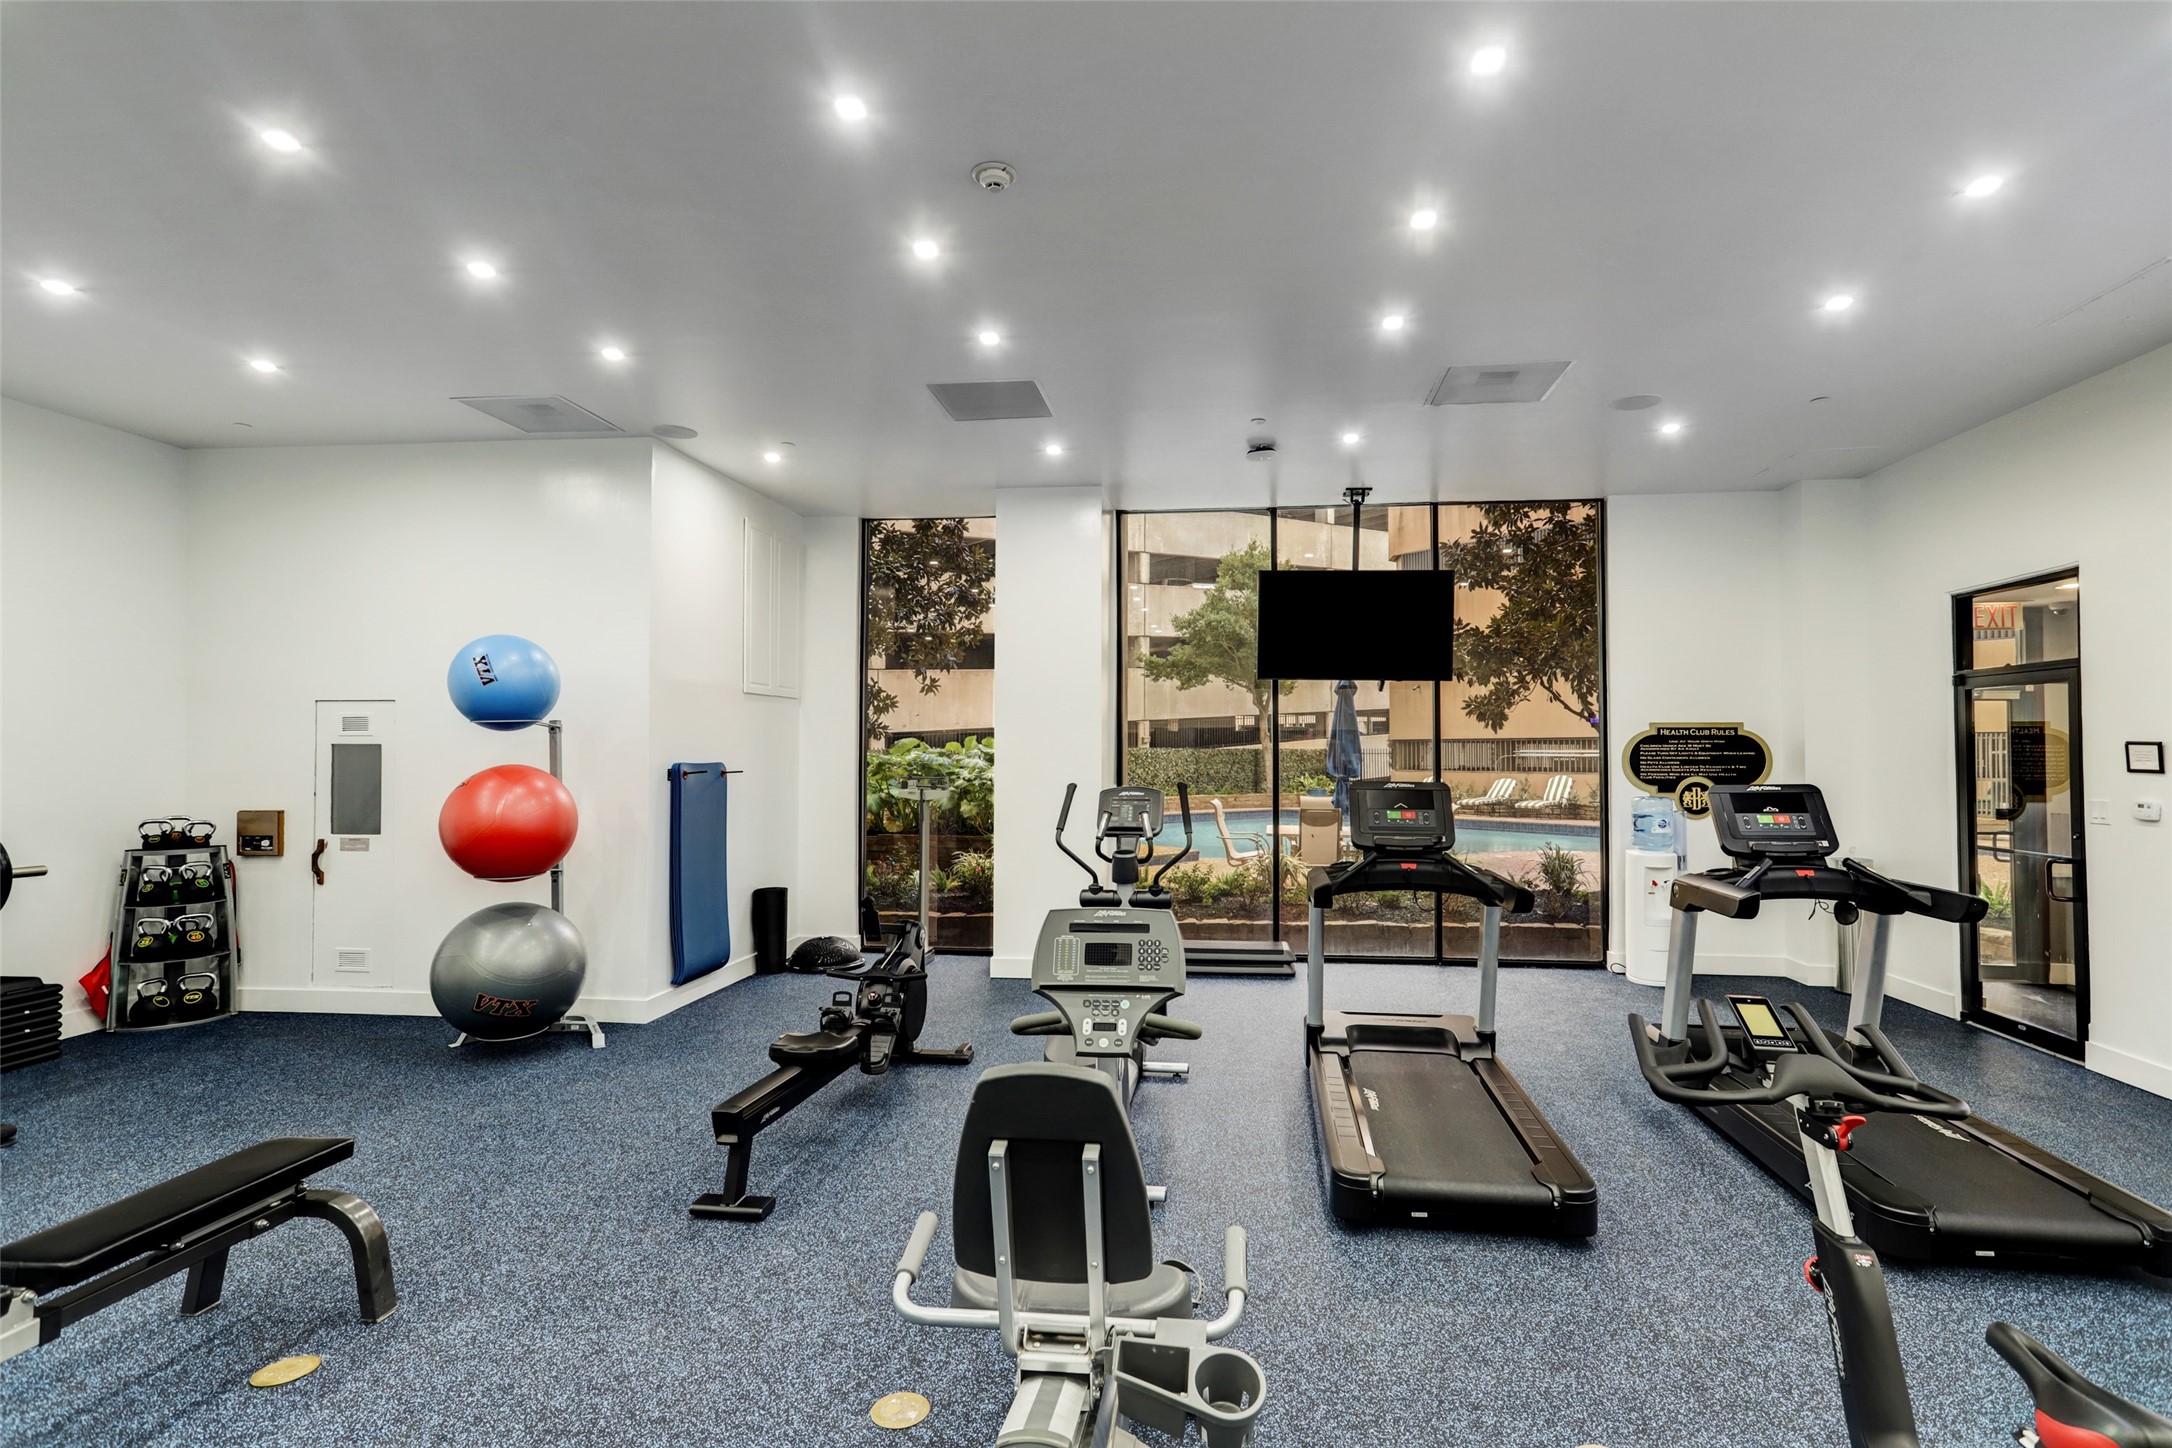 The fitness center includes a dry sauna and overlooks the pool area. It has recently been remodeled and new equipment as of July, 2021.